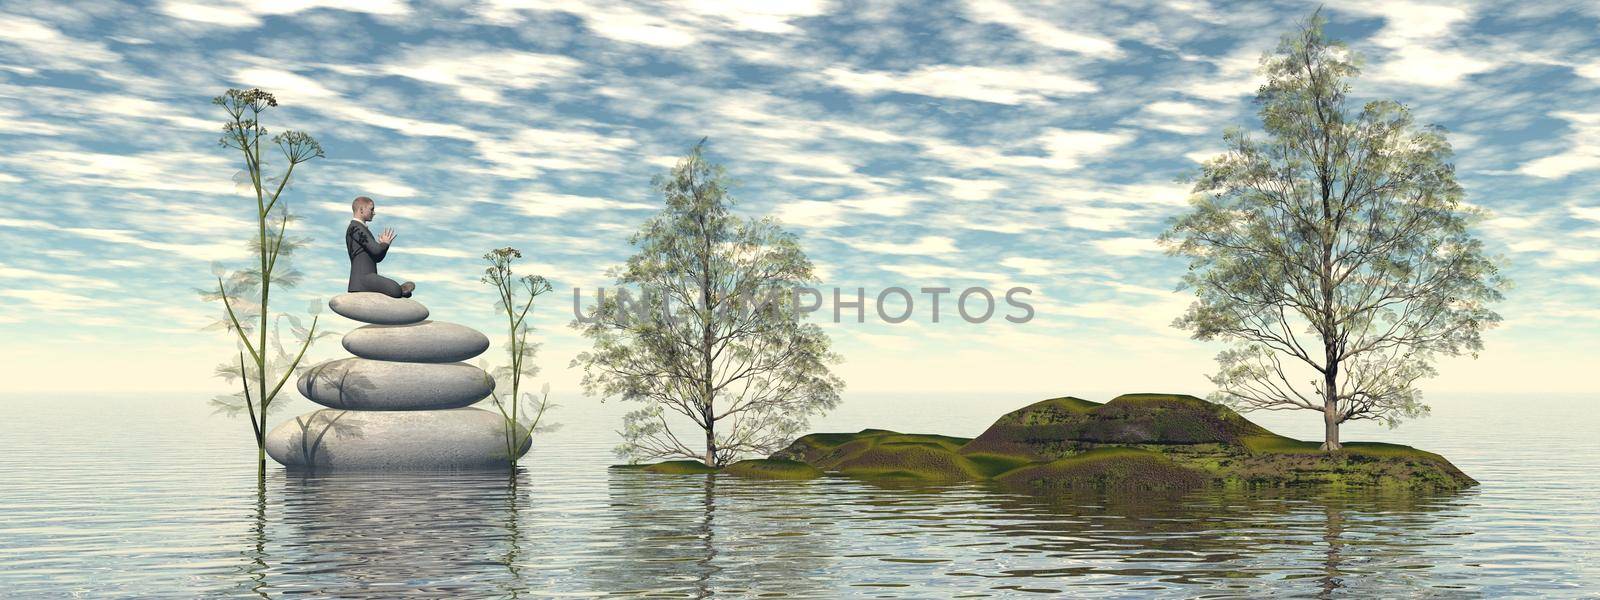 man in meditation and a beautiful landscape - 3d rendering by mariephotos